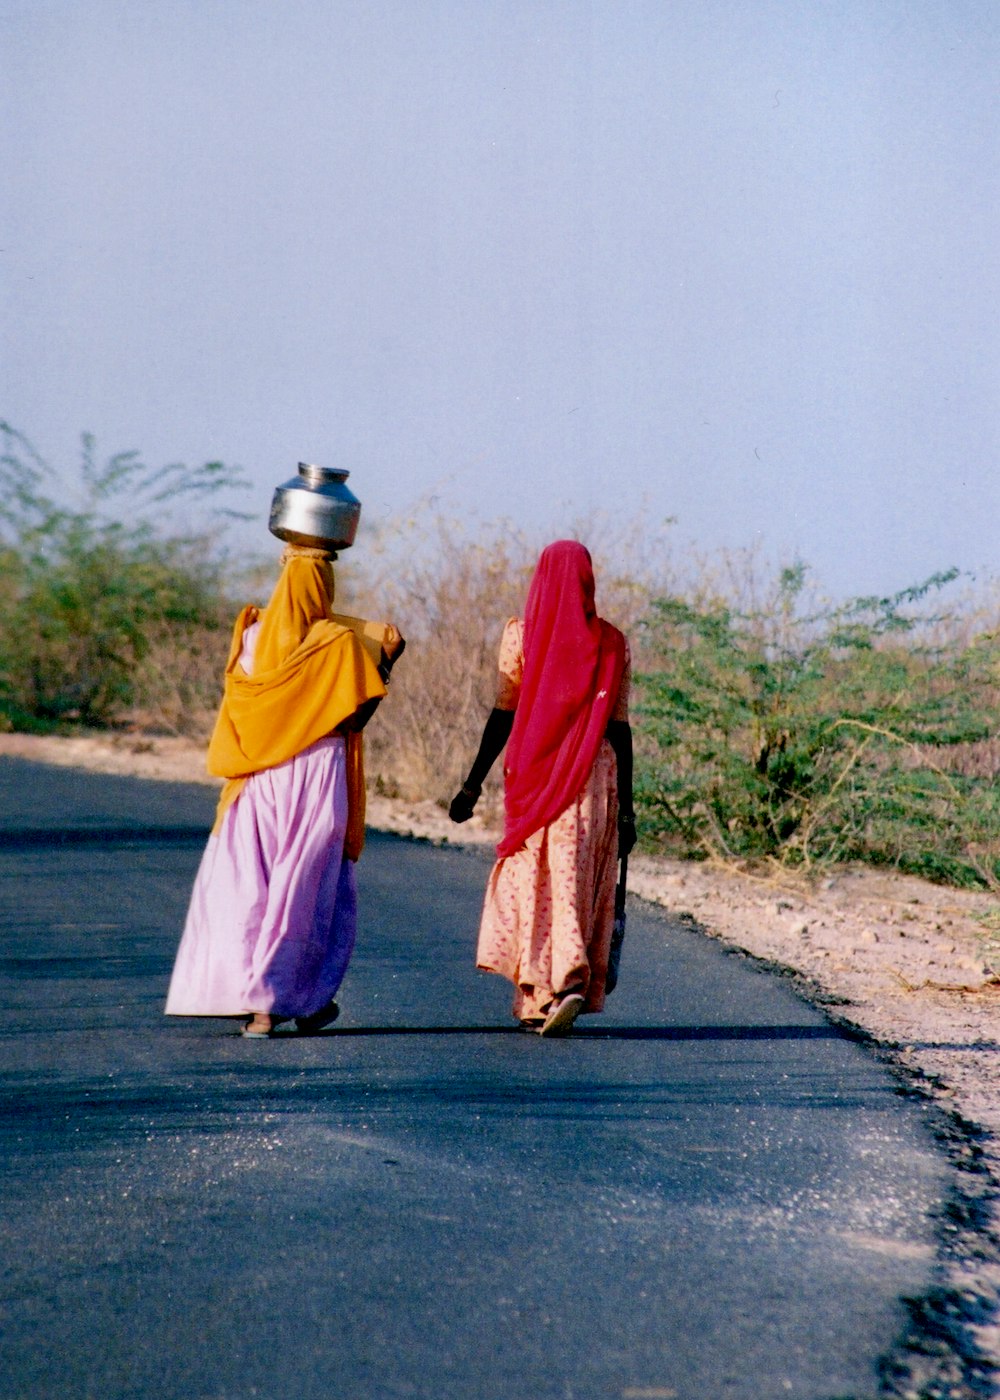 woman in red hijab and yellow dress walking on road during daytime